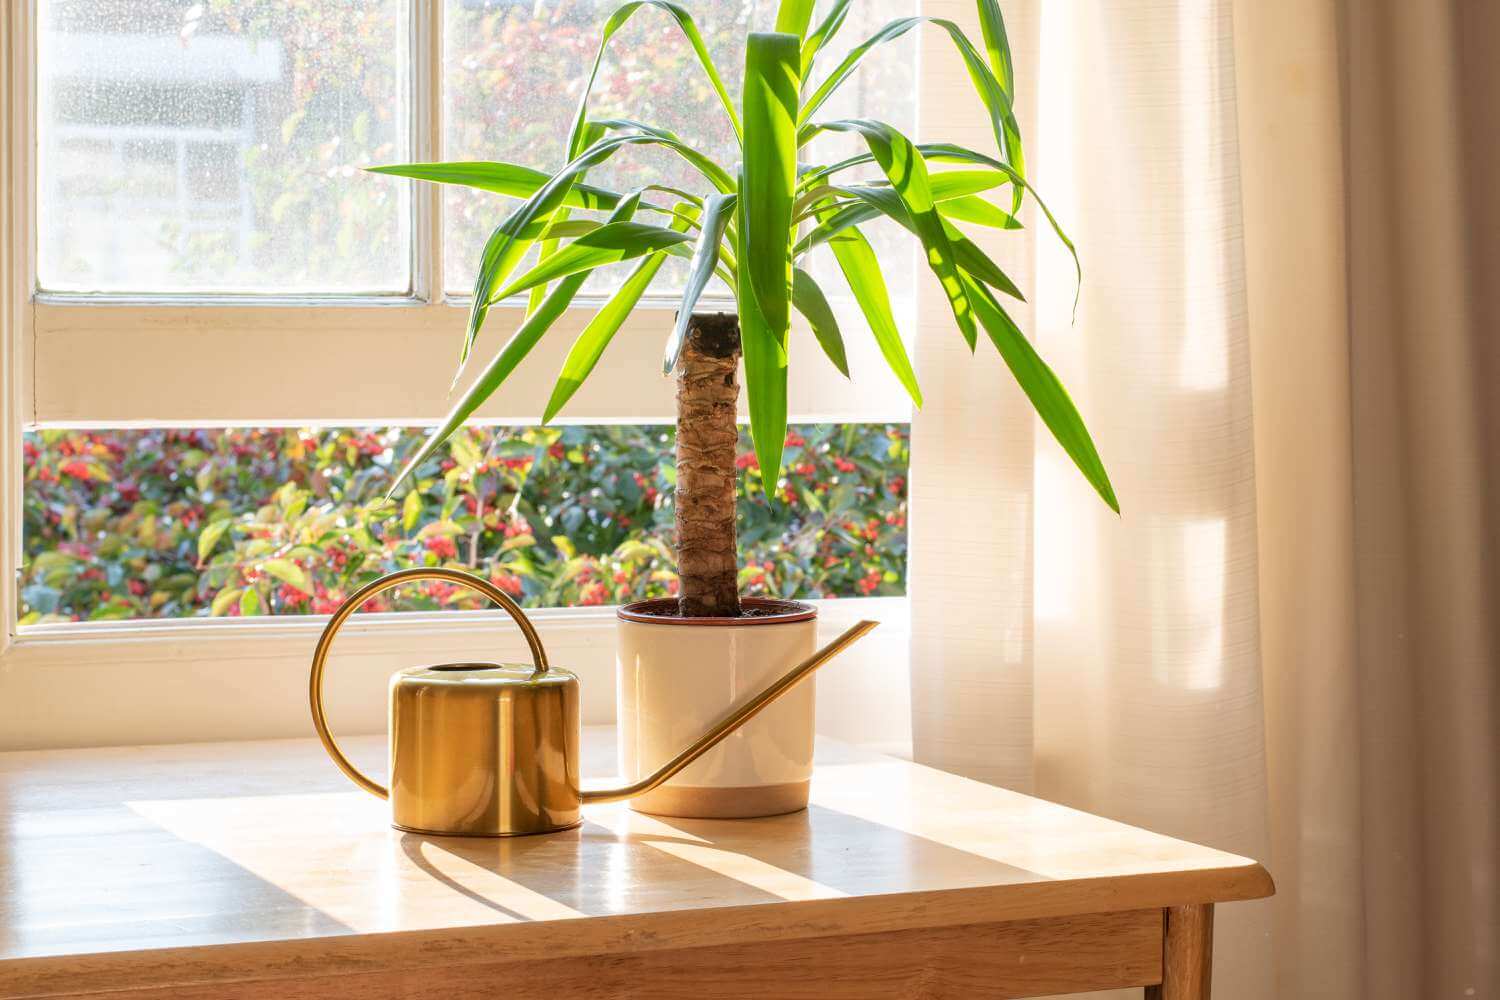 A Yucca plant in a pot sits on a table near a window, adding a touch of greenery to the room